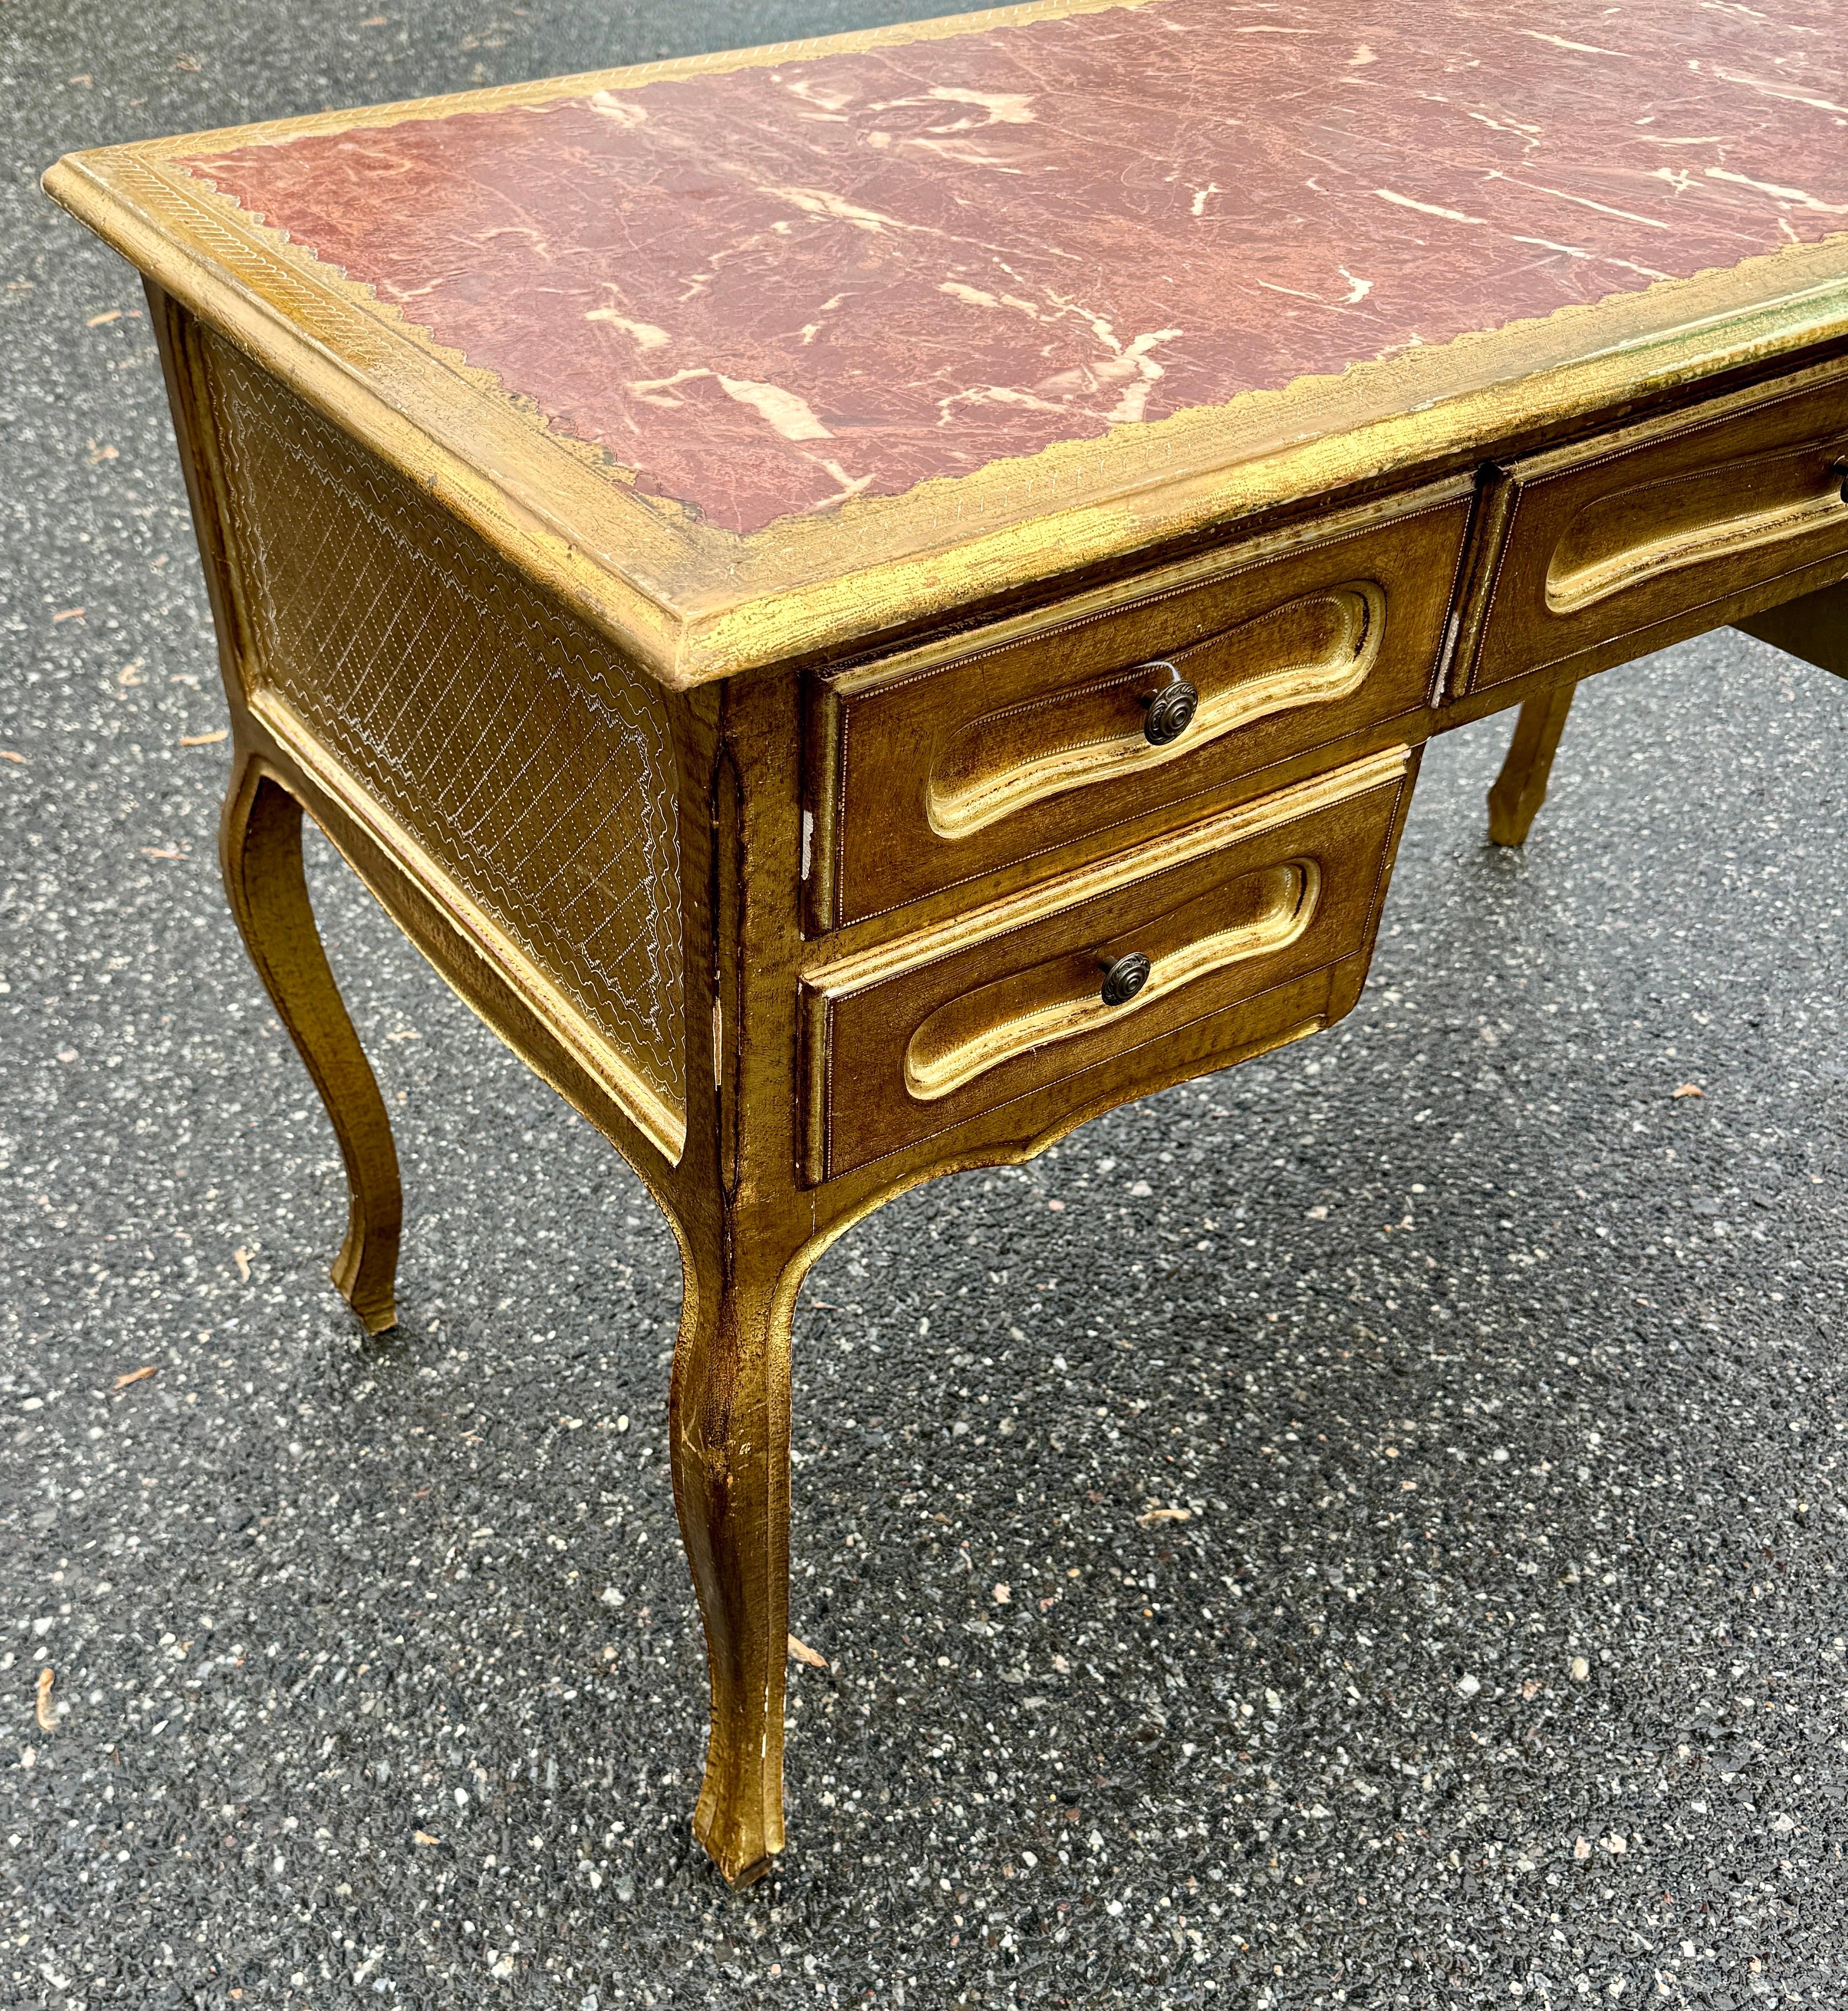 20th Century Italian Mid-Century Florentine Gilt Desk with Drawers For Sale